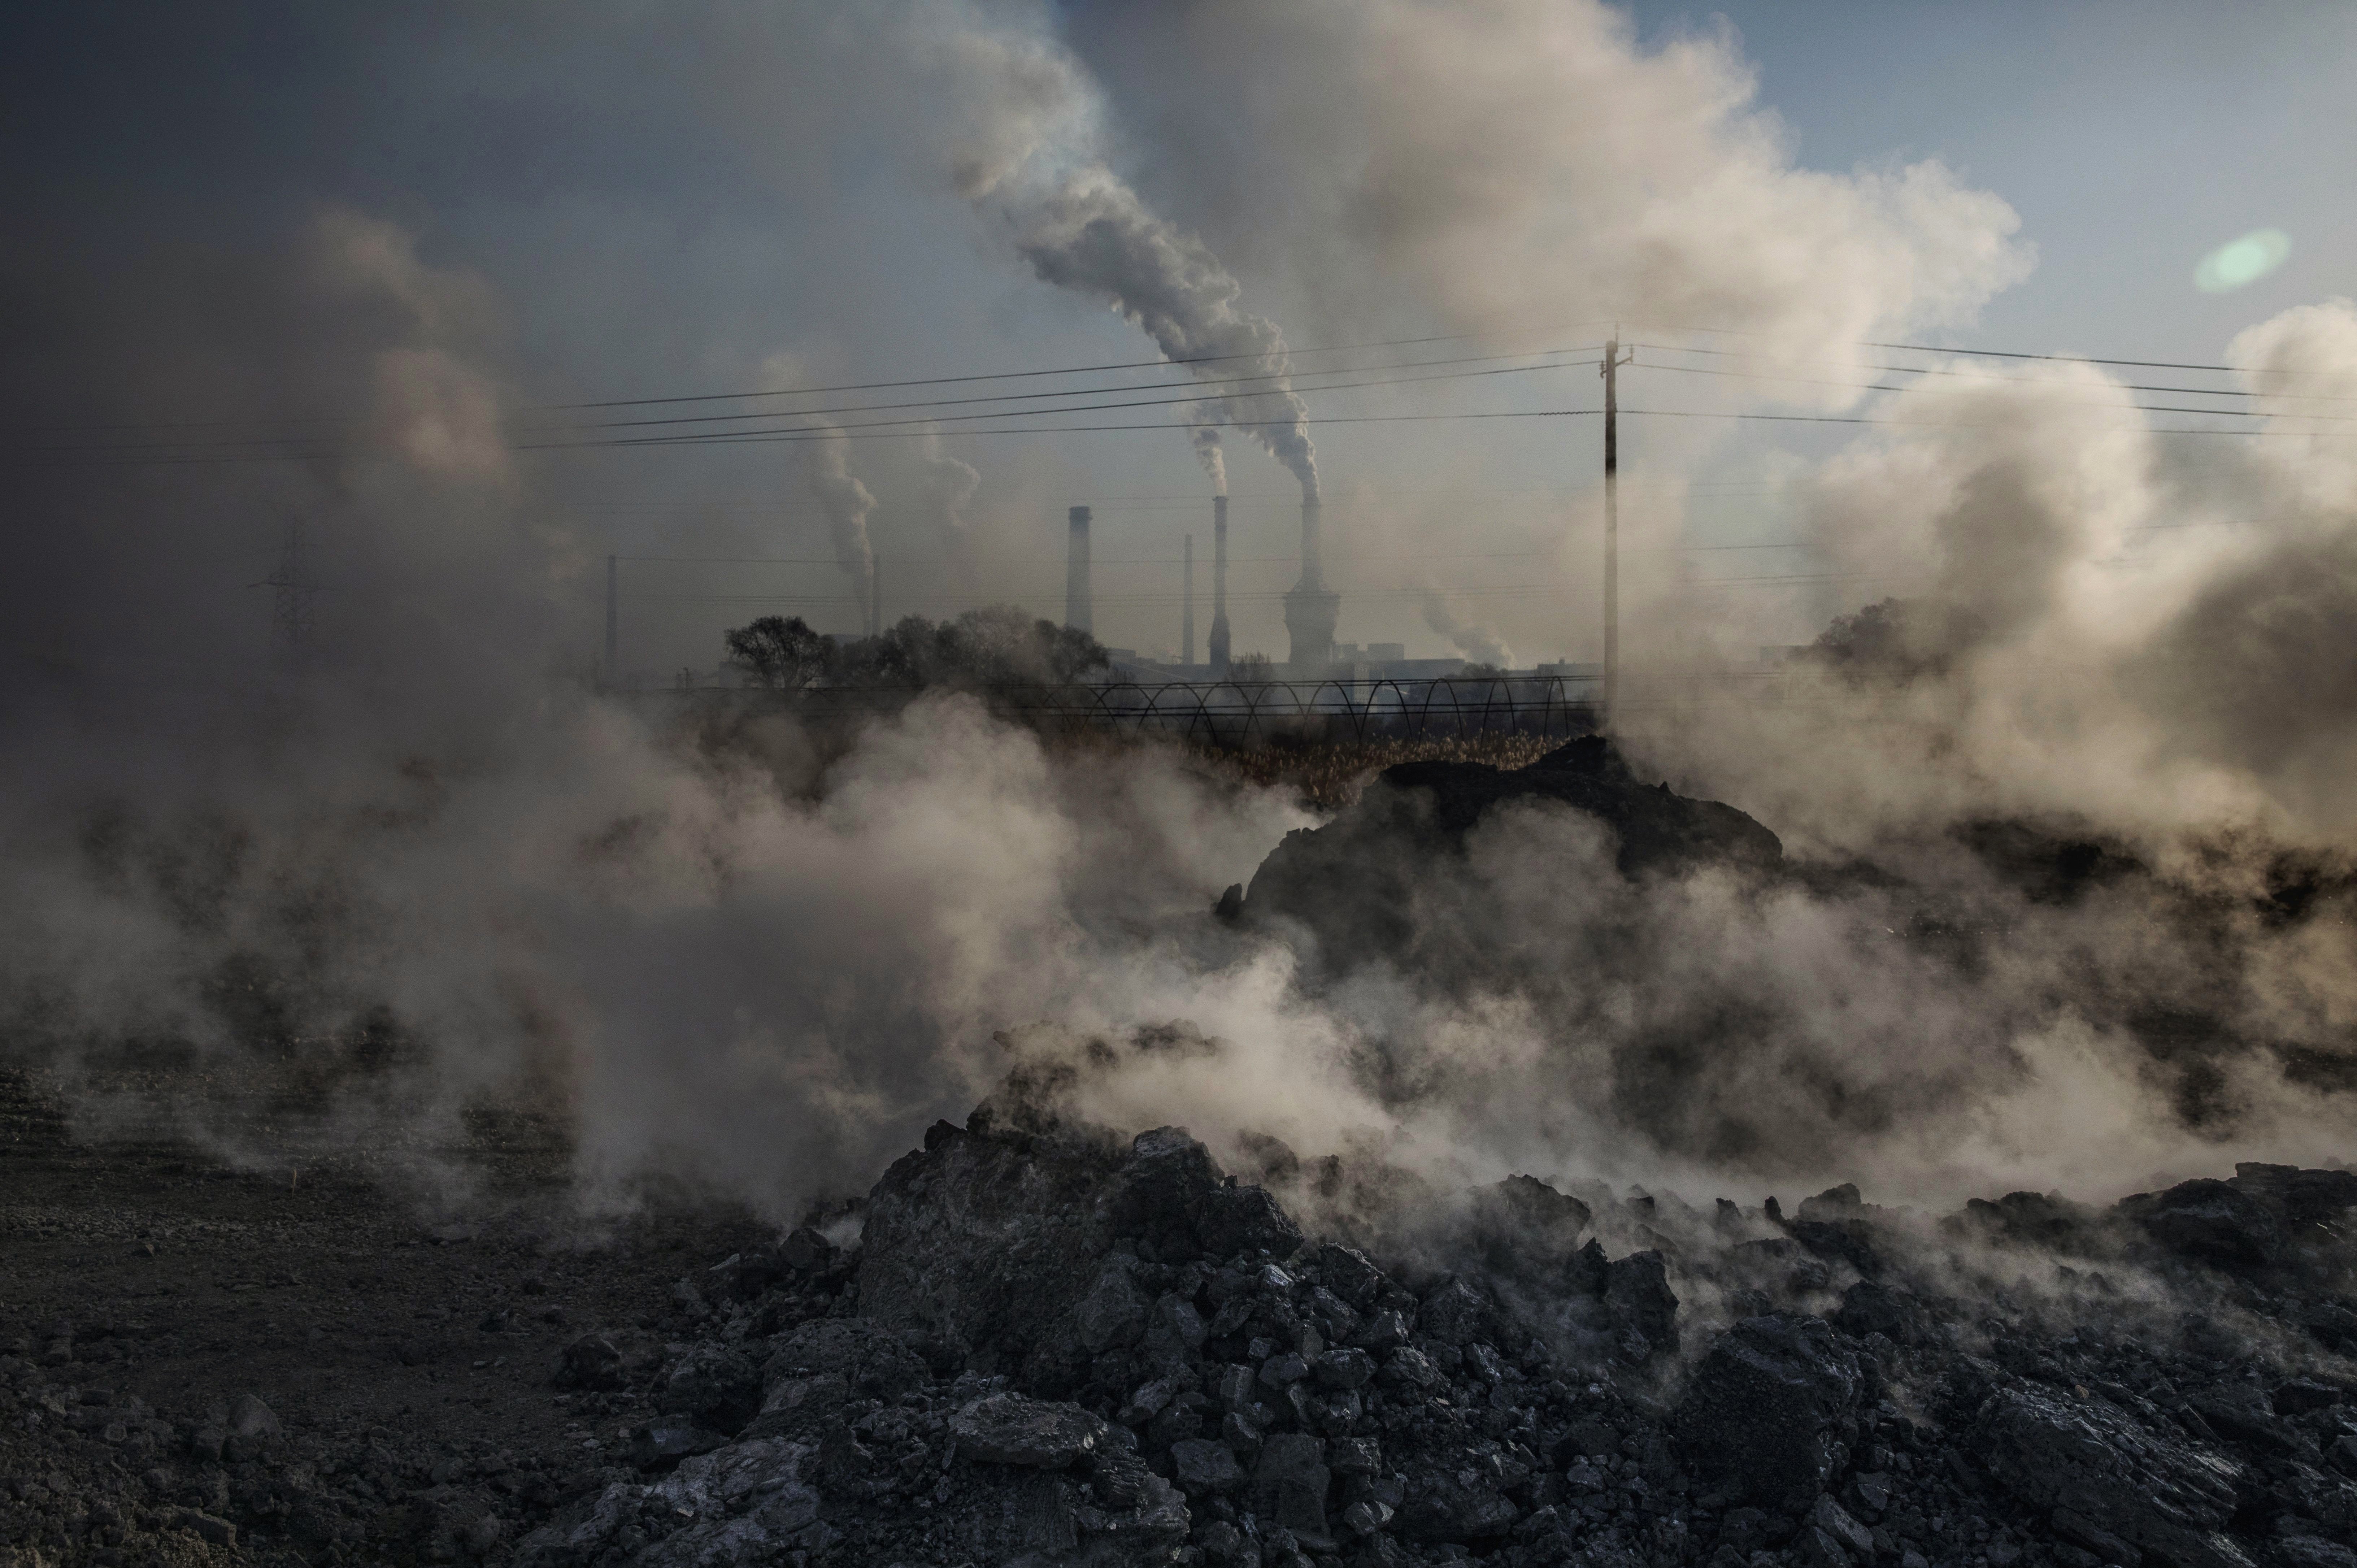 US-based research firm Axios wrote last week that if ‘Beijing responds with a large property and construction-heavy stimulus package, the resulting increase in cement and steel production could increase carbon intensity.’ Photo: Getty Images